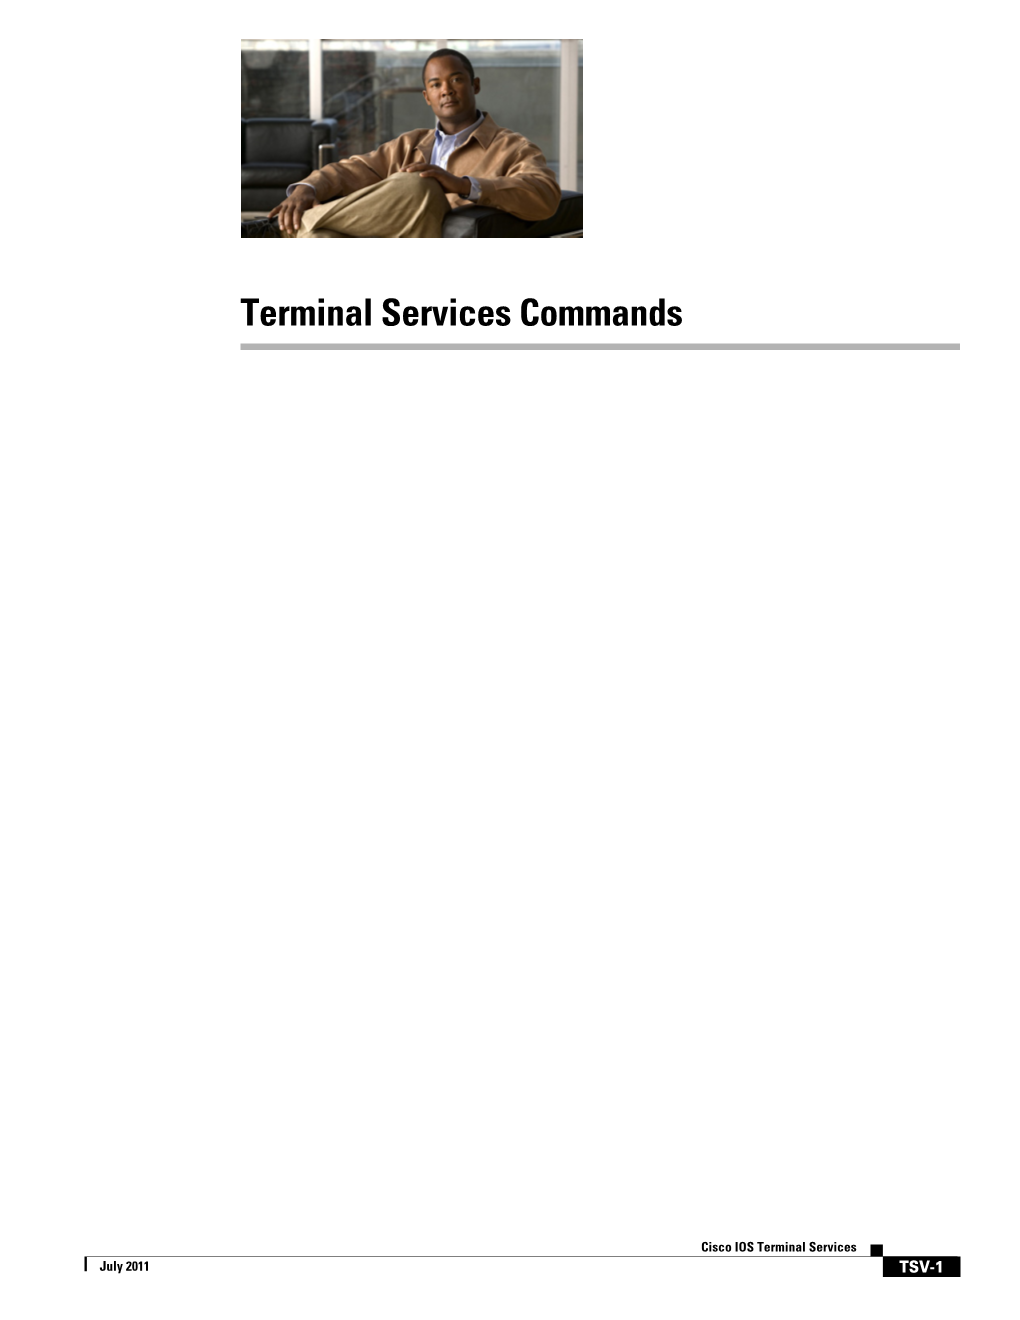 Cisco IOS Terminal Services Command Reference